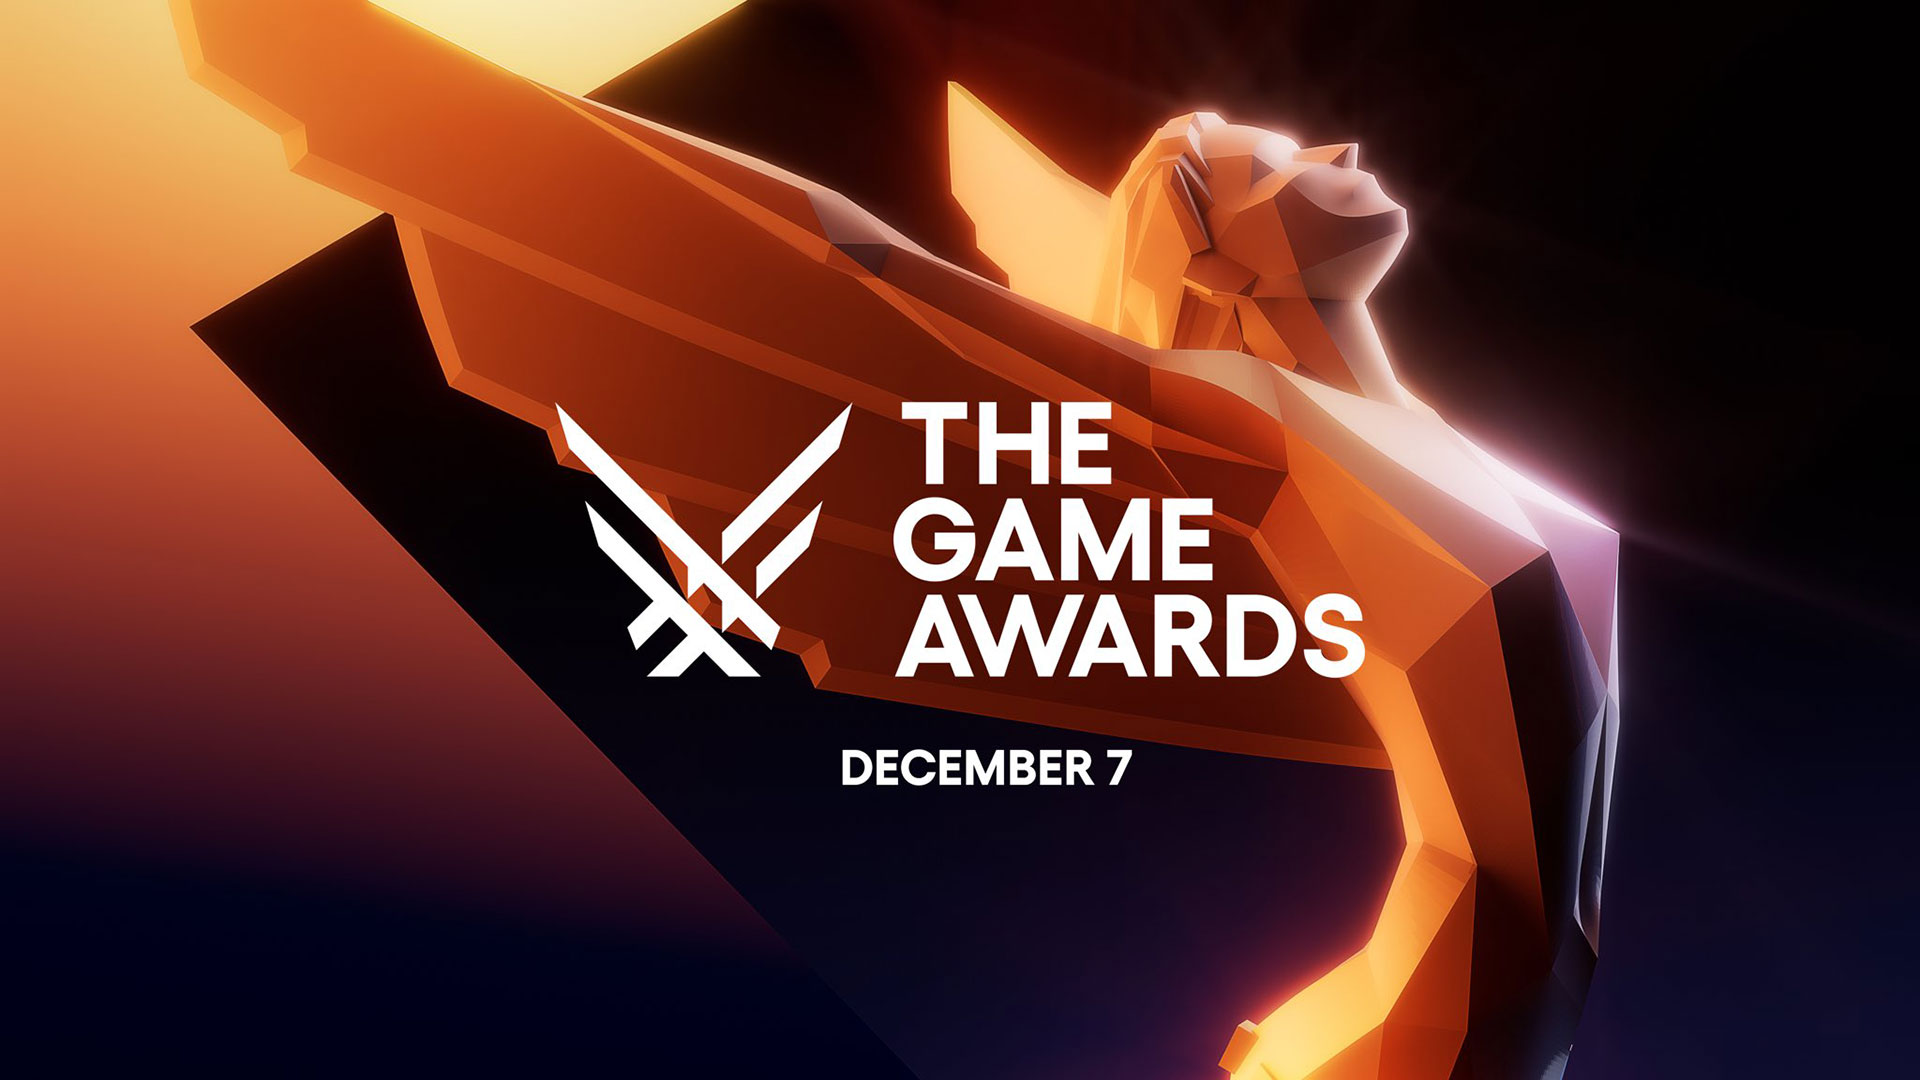 The Game Awards 2023 will be streaming live on December 7